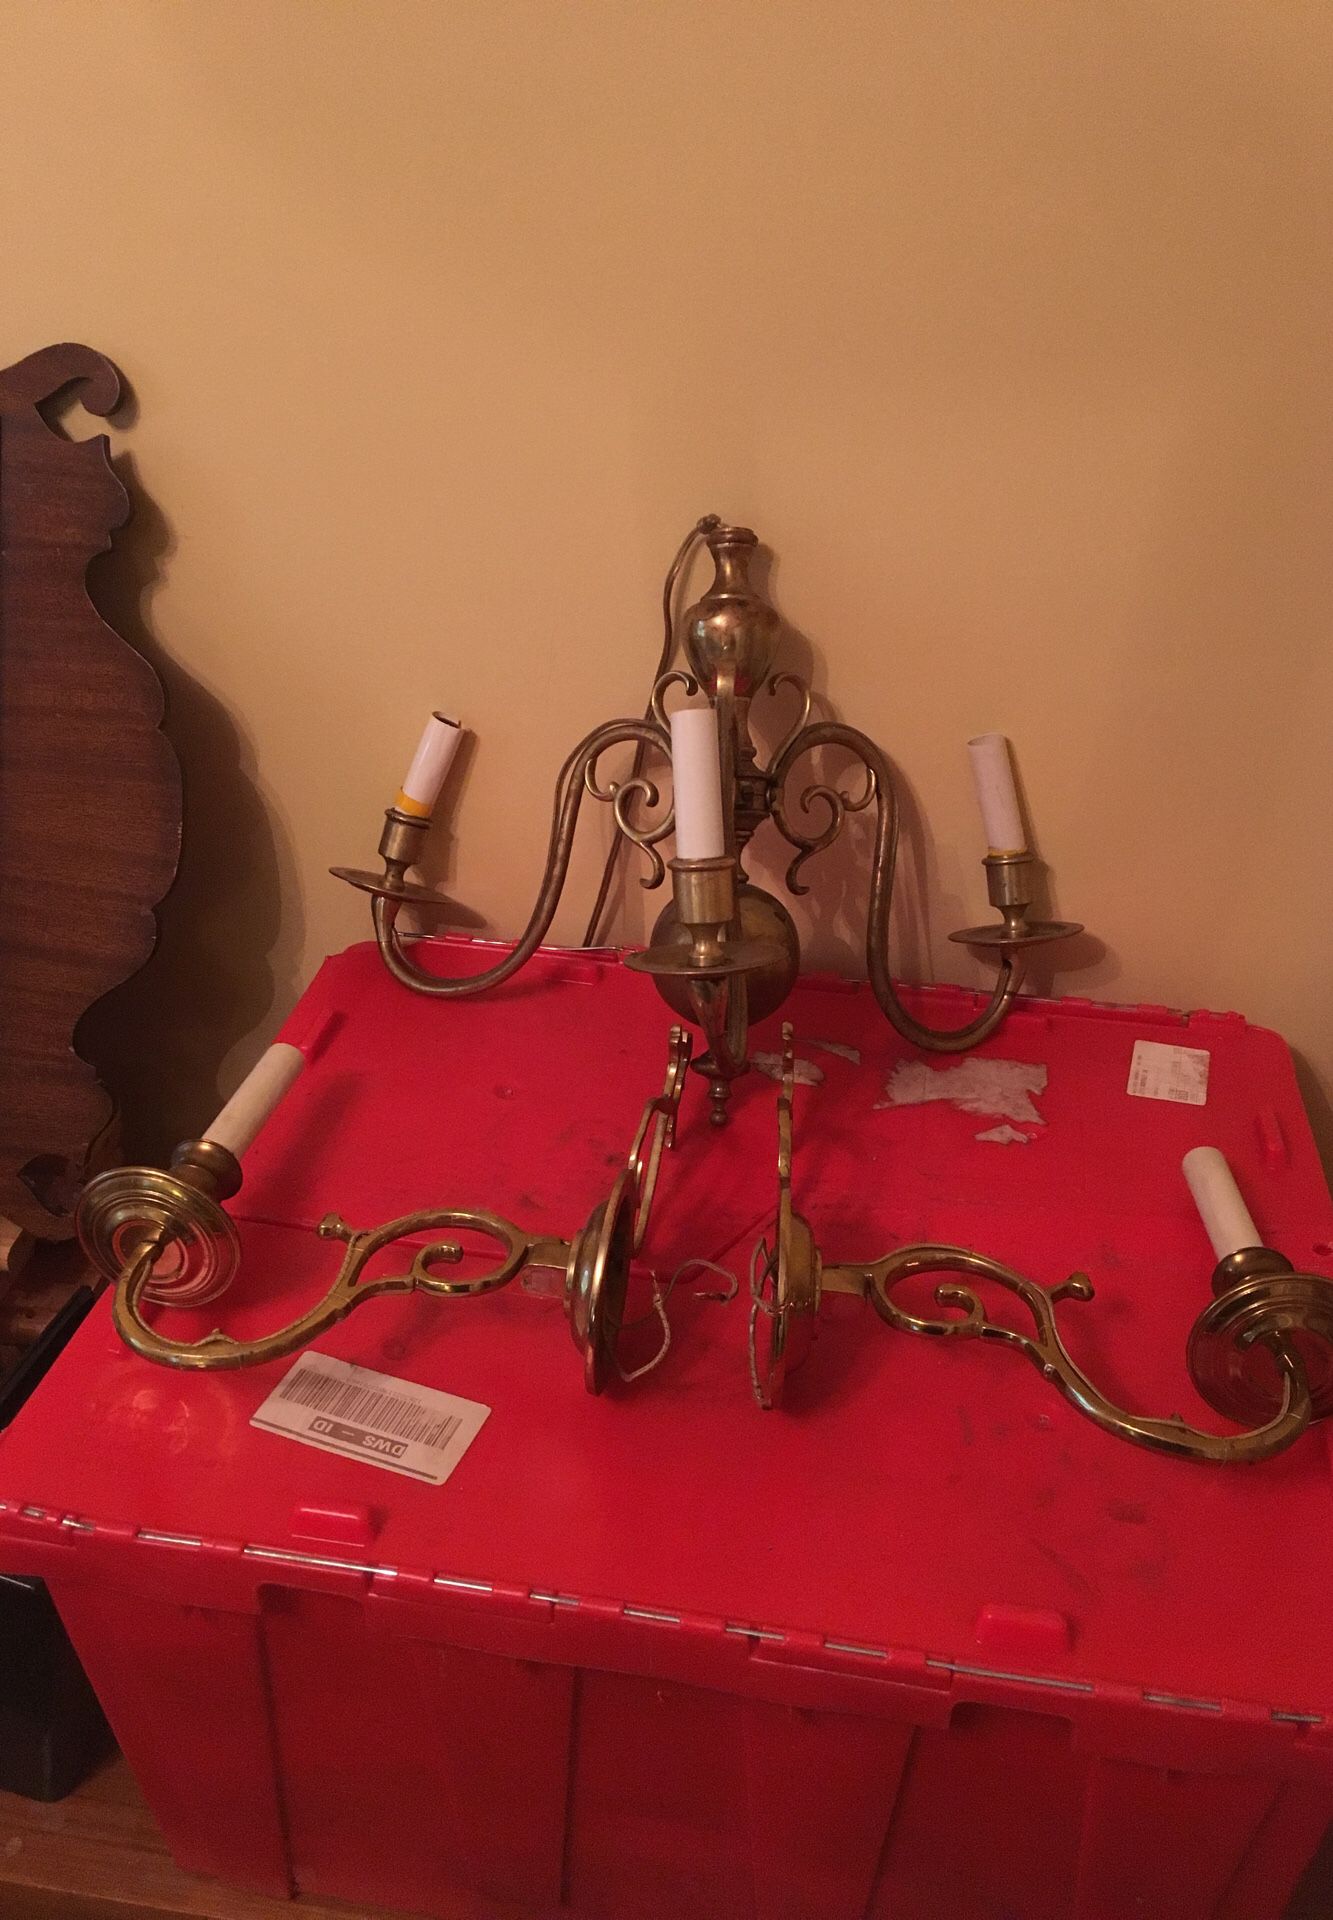 Pair of Solid brass wall sconces and chandelier